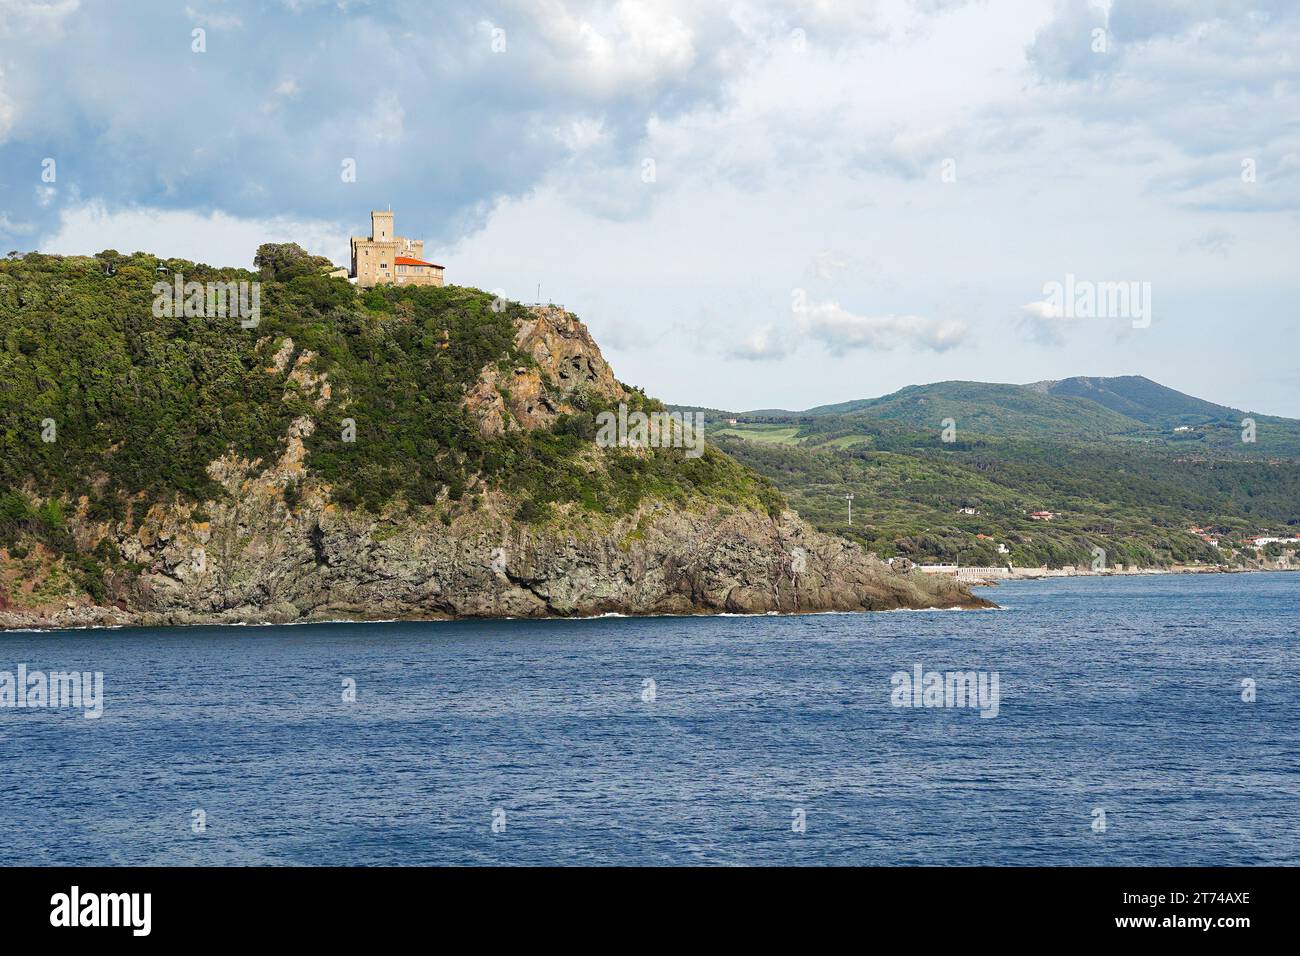 Castle on the cliff by The Ligurian Sea. Sonnino Castle in Quercianella, Tuscany, Italy Stock Photo